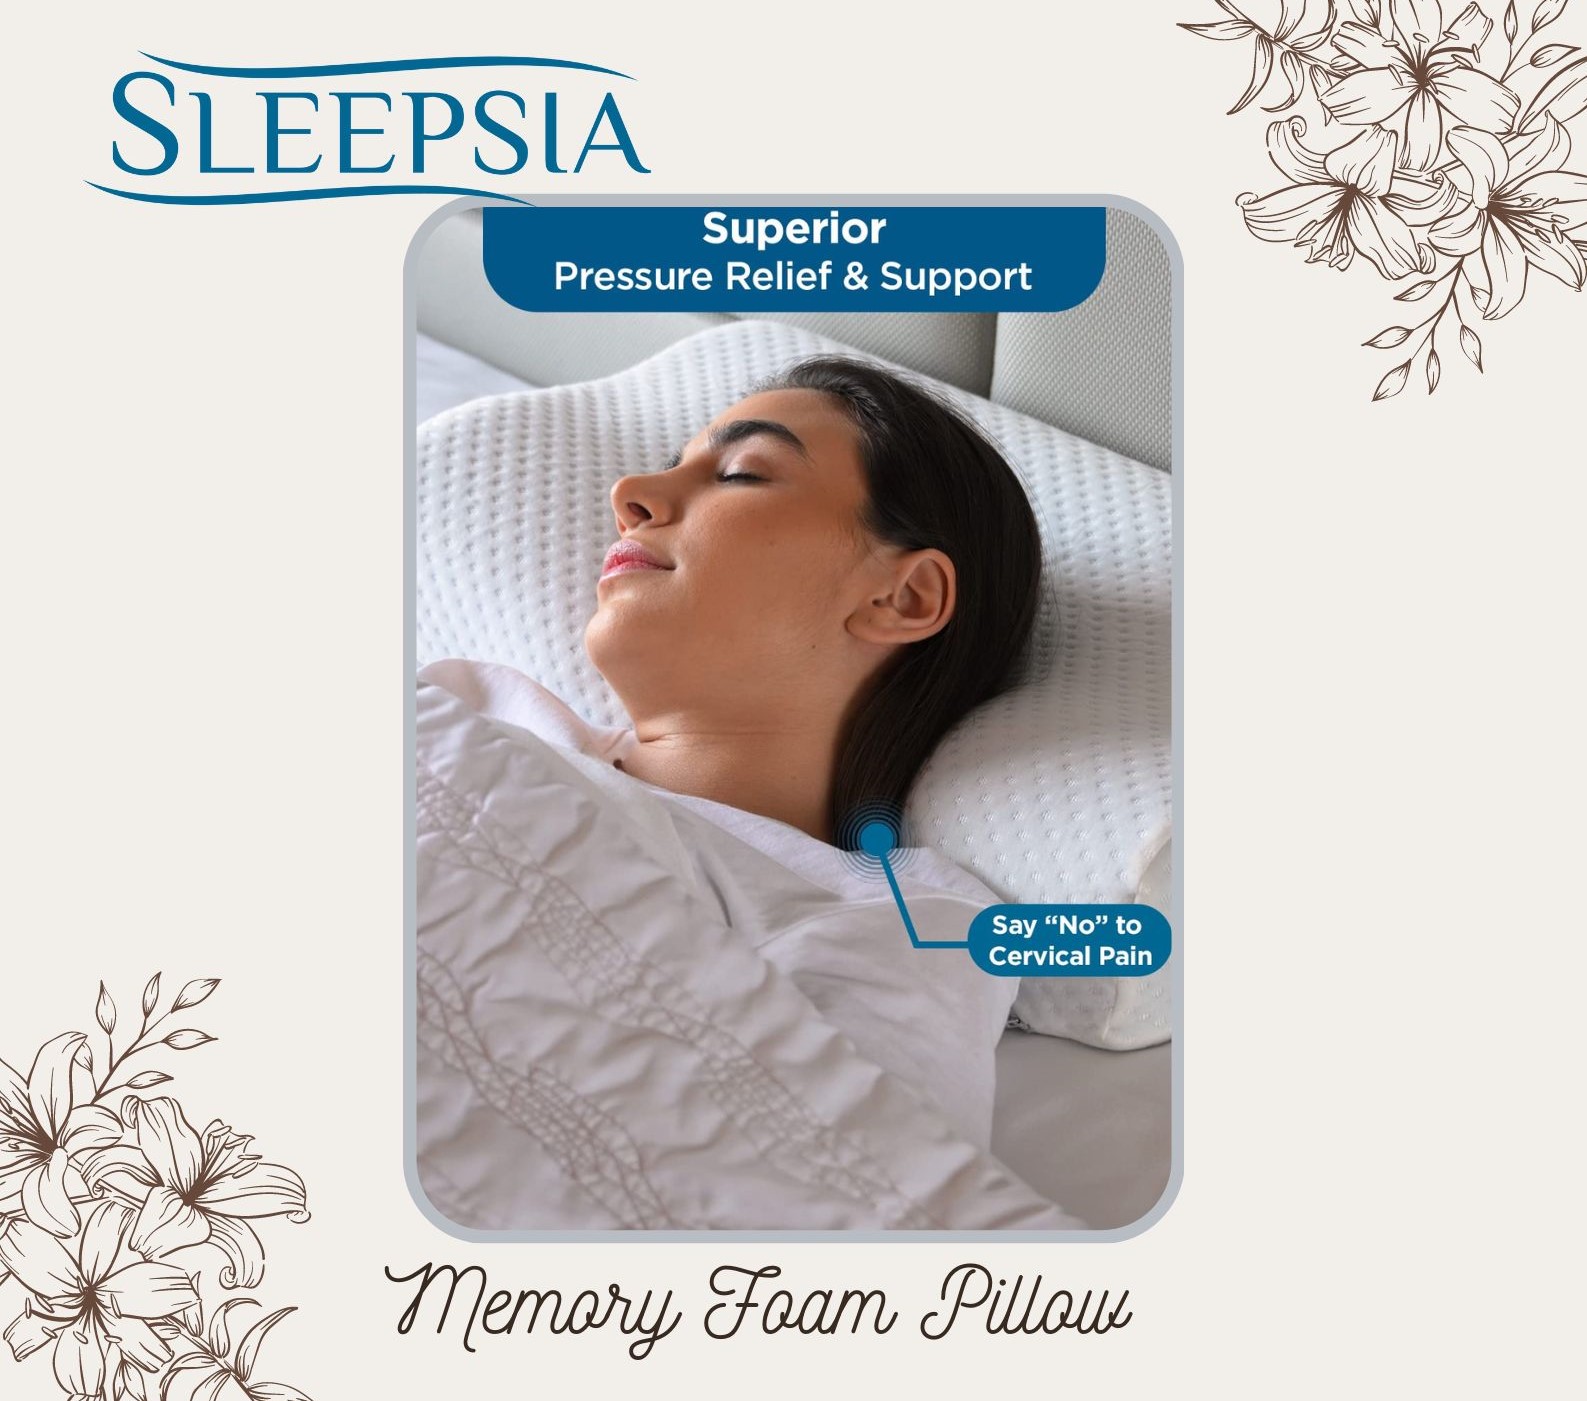 Which Memory Foam Pillow Is Good In India?